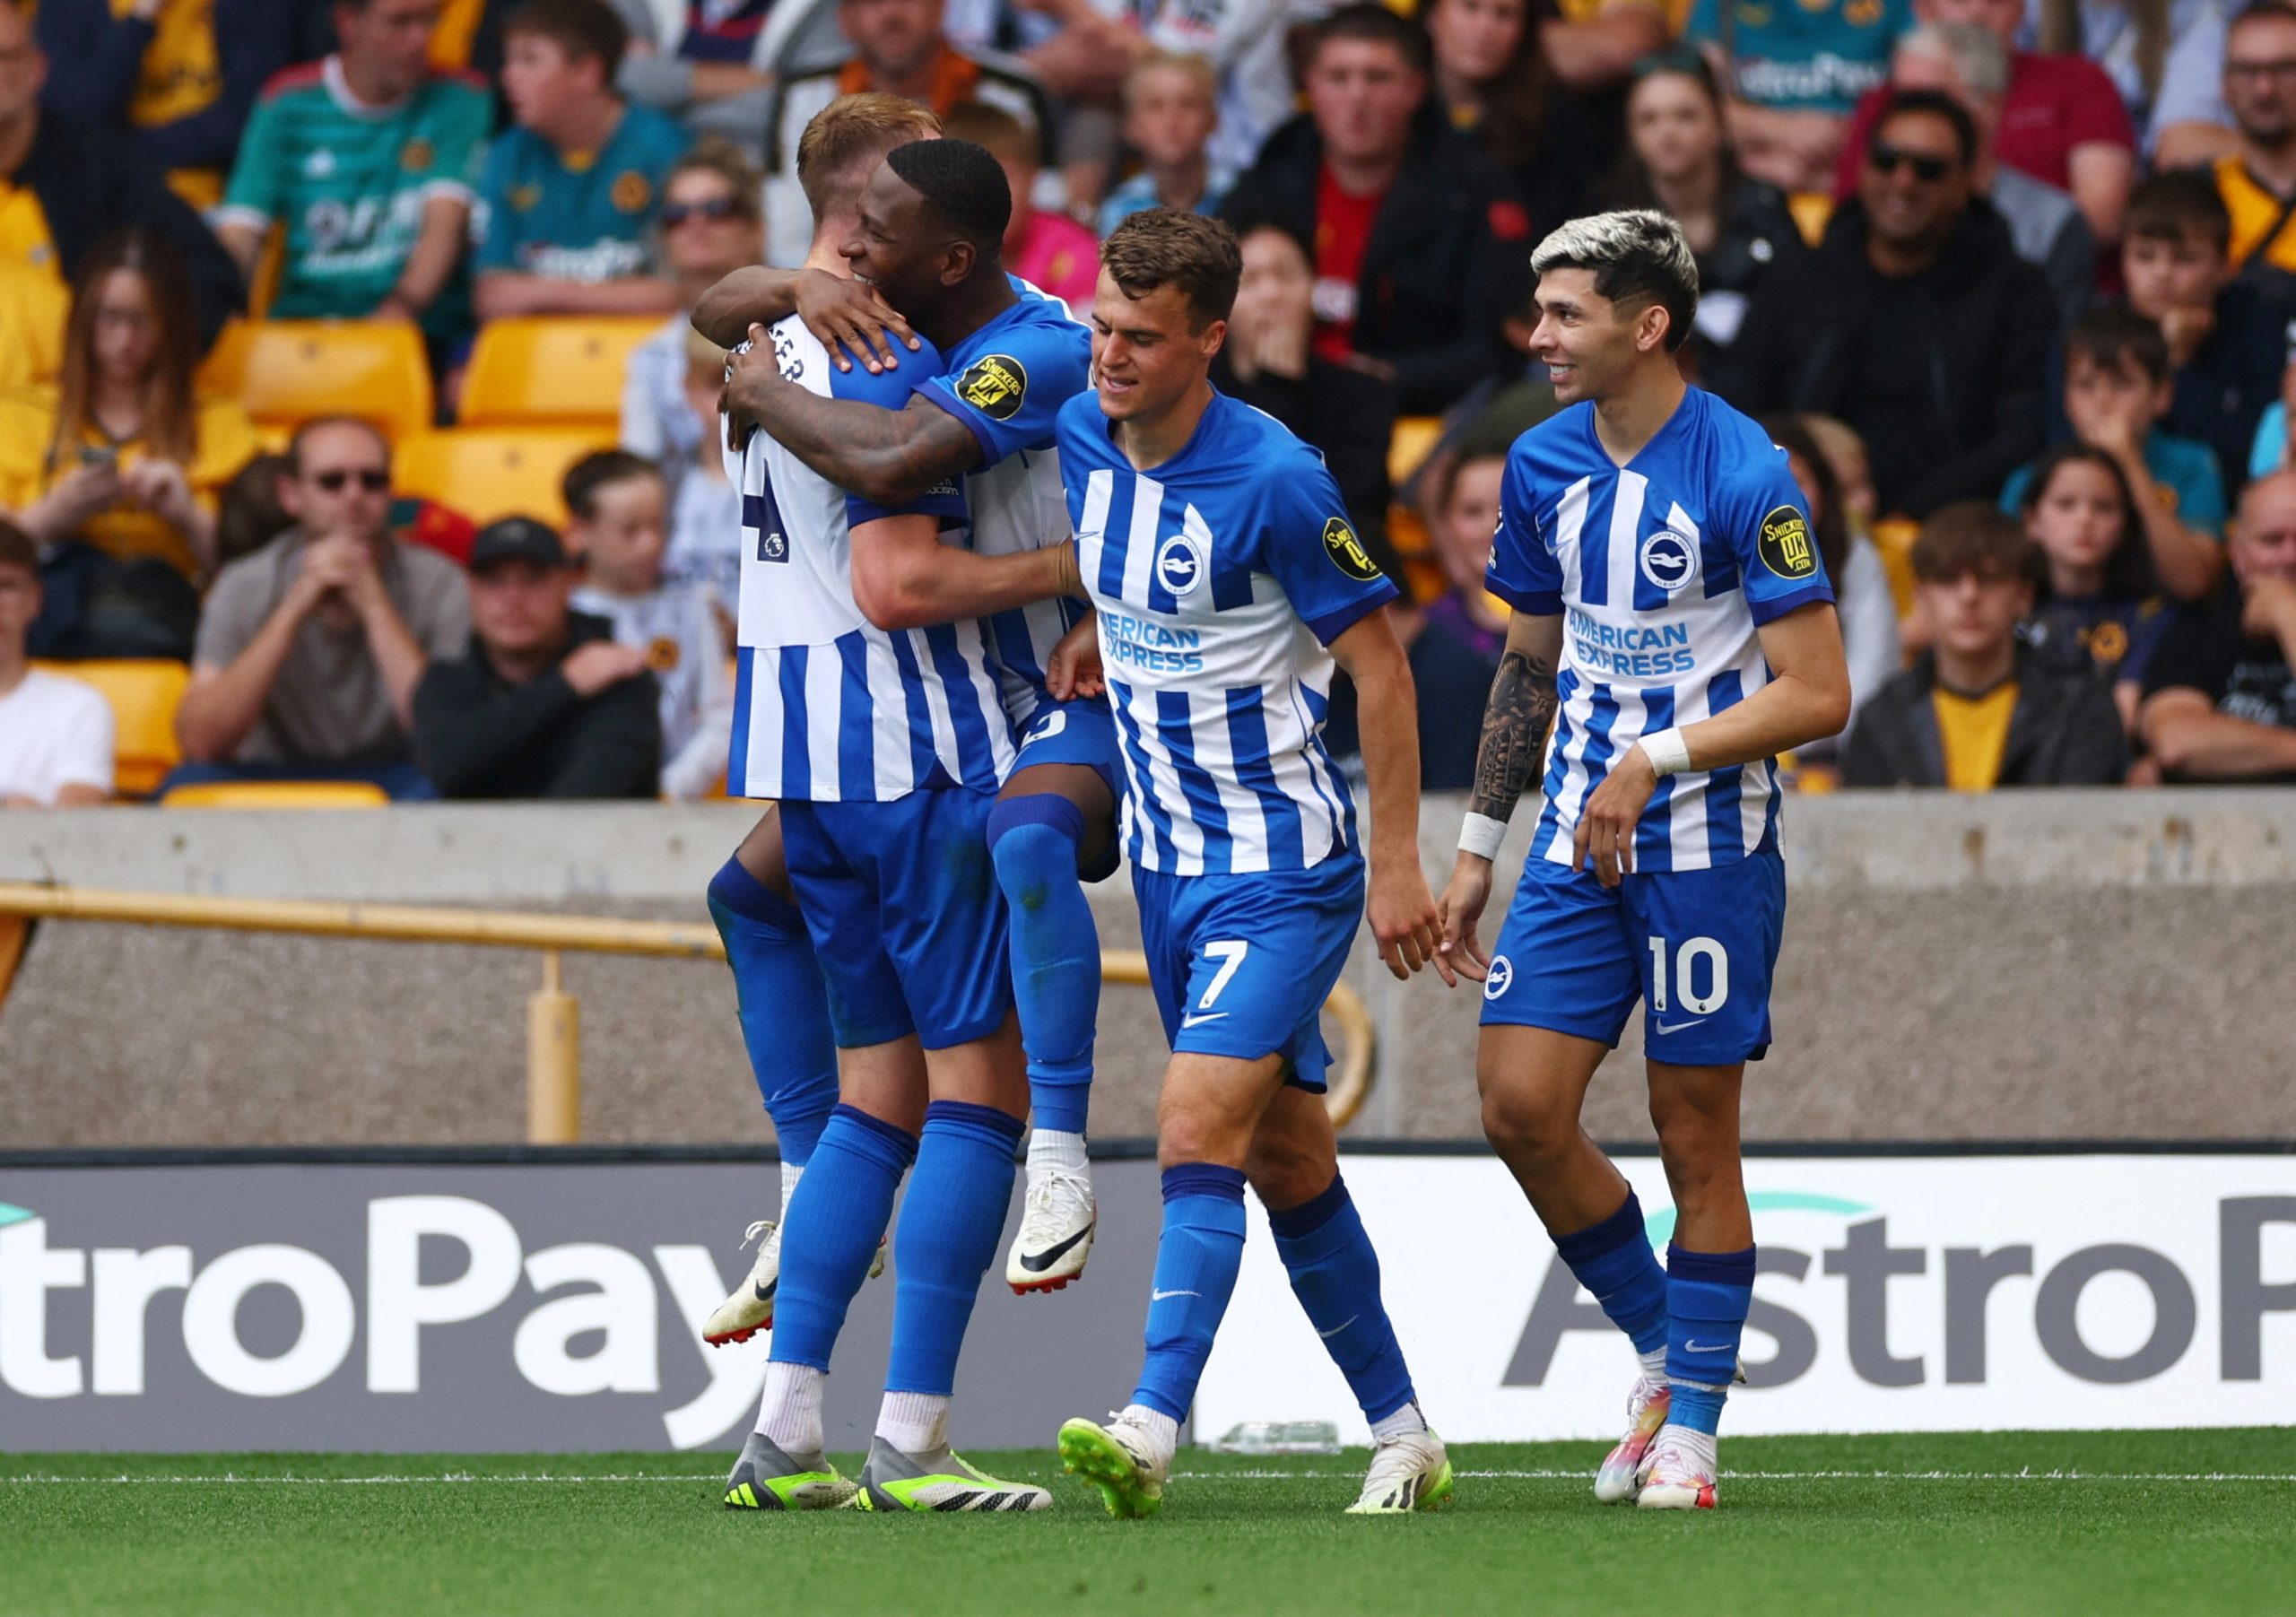 Soccer Football - Premier League - Wolverhampton Wanderers v Brighton & Hove Albion - Molineux Stadium, Wolverhampton, Britain - August 19, 2023 Brighton & Hove Albion's Pervis Estupinan celebrates scoring their second goal with Solly March, Julio Enciso and teammates Action Images via Reuters/Andrew Boyers Action Images via Reuters/Andrew Boyers EDITORIAL USE ONLY. No use with unauthorized audio, video, data, fixture lists, club/league logos or 'live' services. Online in-match use limited to 75 images, no video emulation. No use in betting, games or single club /league/player publications.  Please contact your account representative for further details.  REFILE - CORRECTING CAPTION Photo: Andrew Boyers/REUTERS